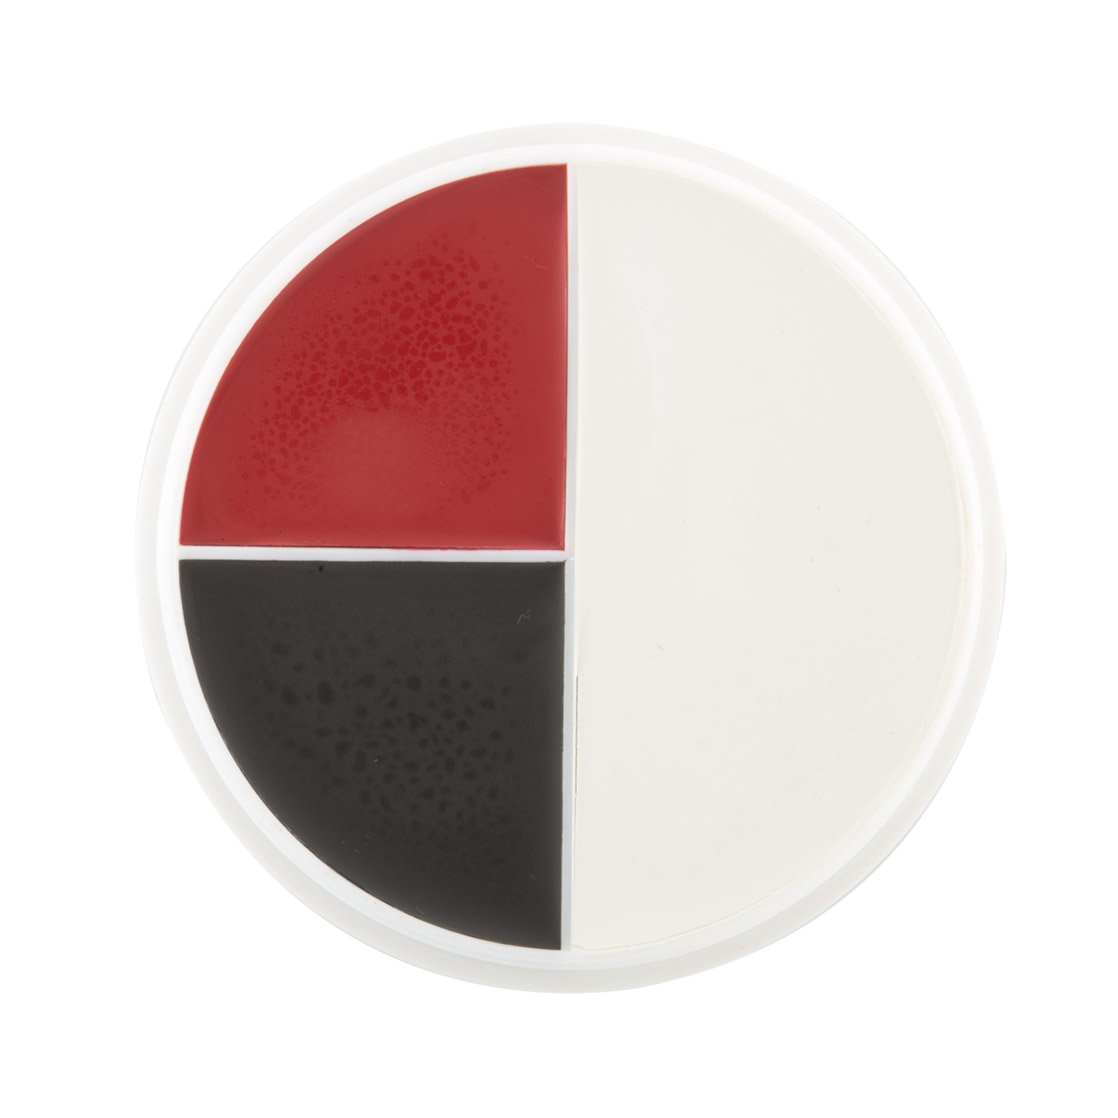 Red, White and Black wheel